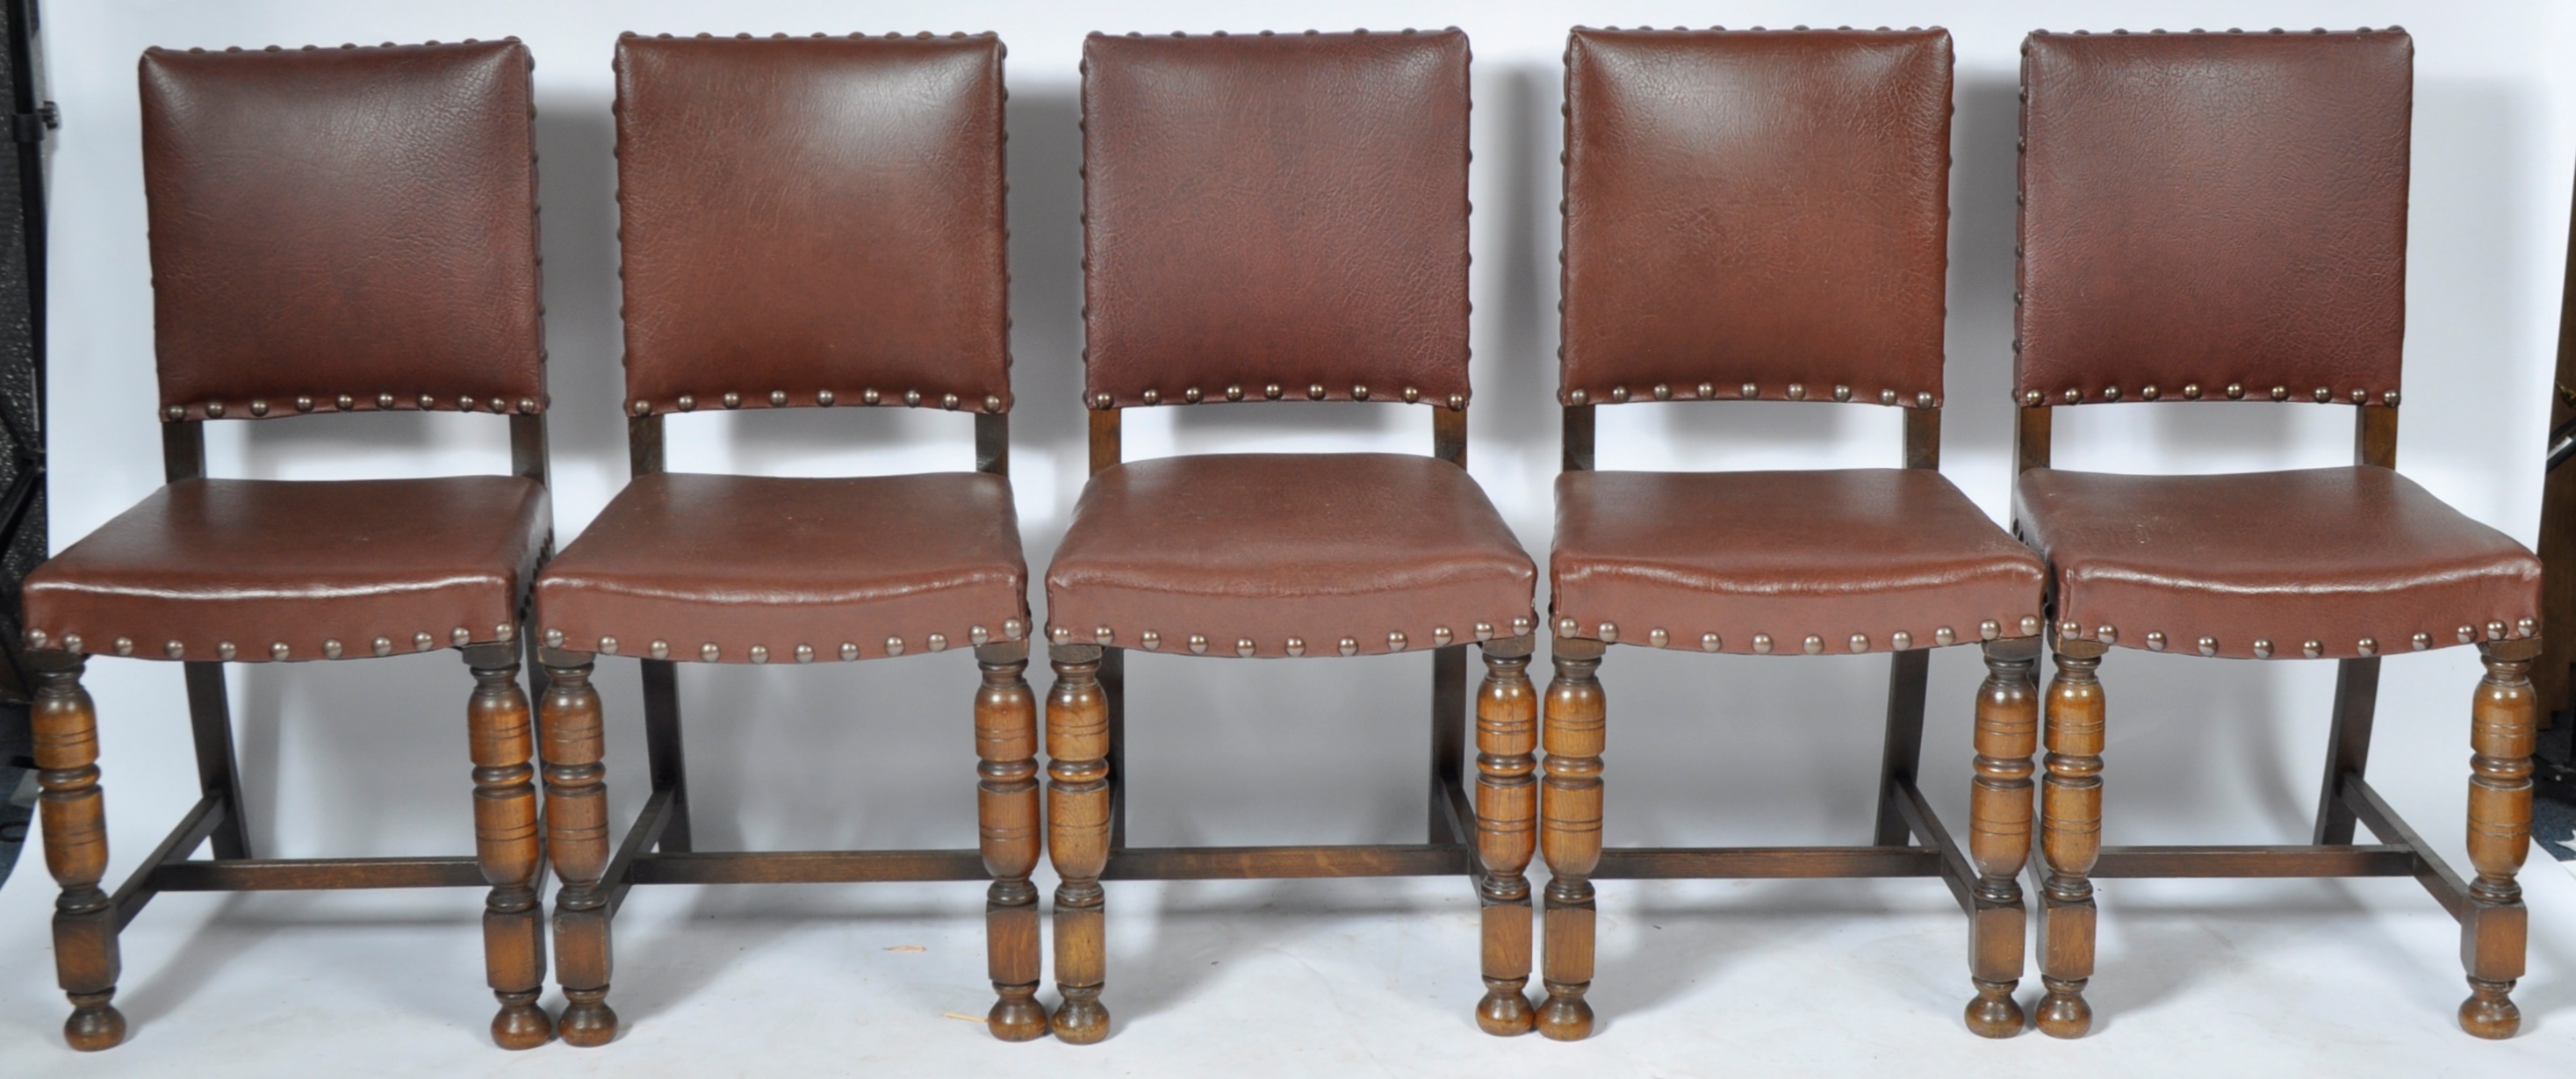 MATCHING SET OF TEN OAK AND LEATHERETTE DINING CHAIRS - Image 3 of 11